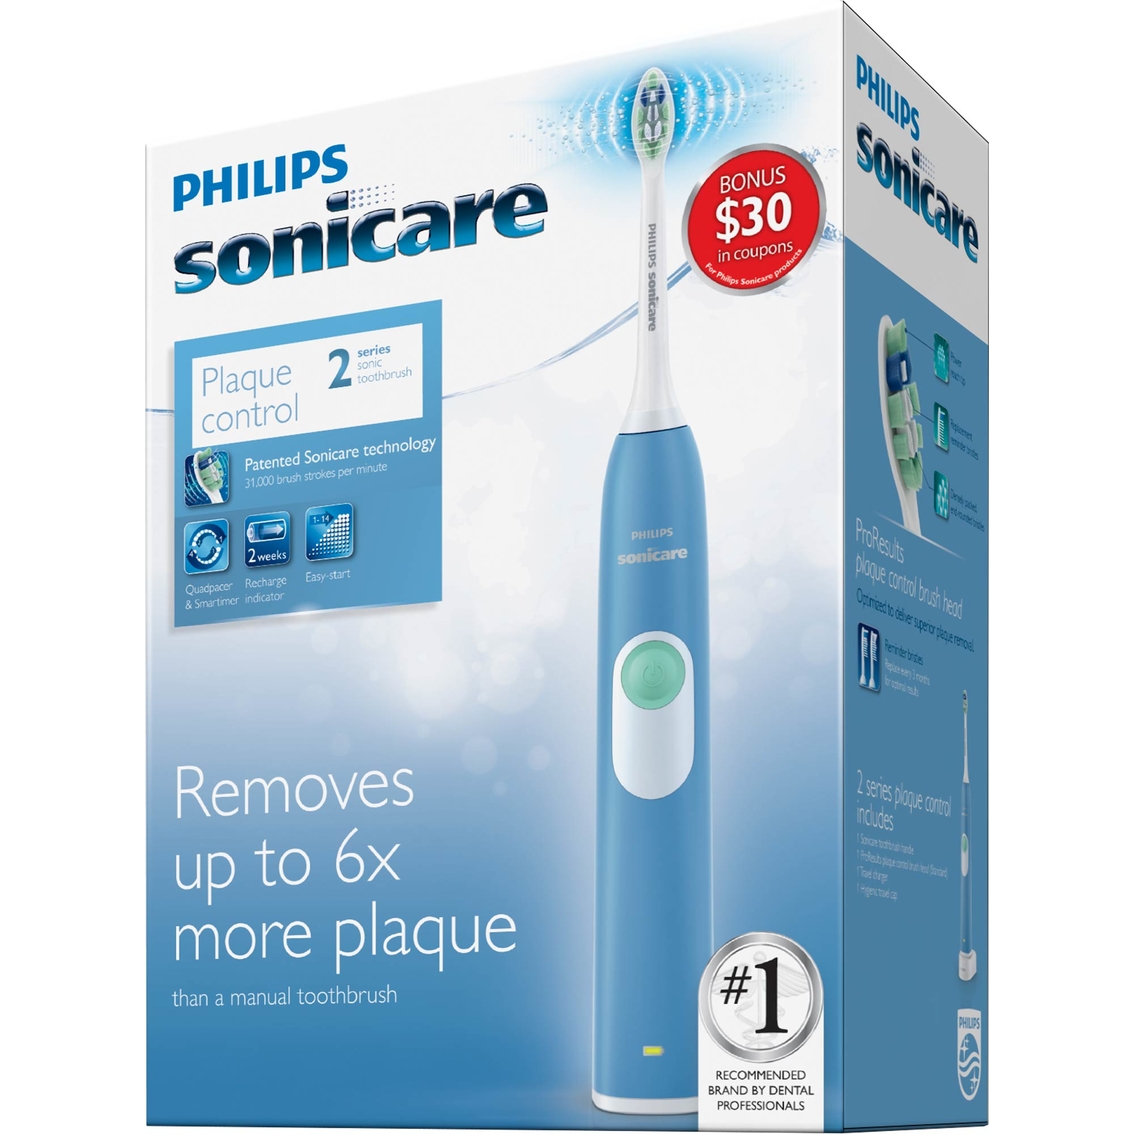 Philips Sonicare Series 2 Plaque Control Rechargeable Electric 